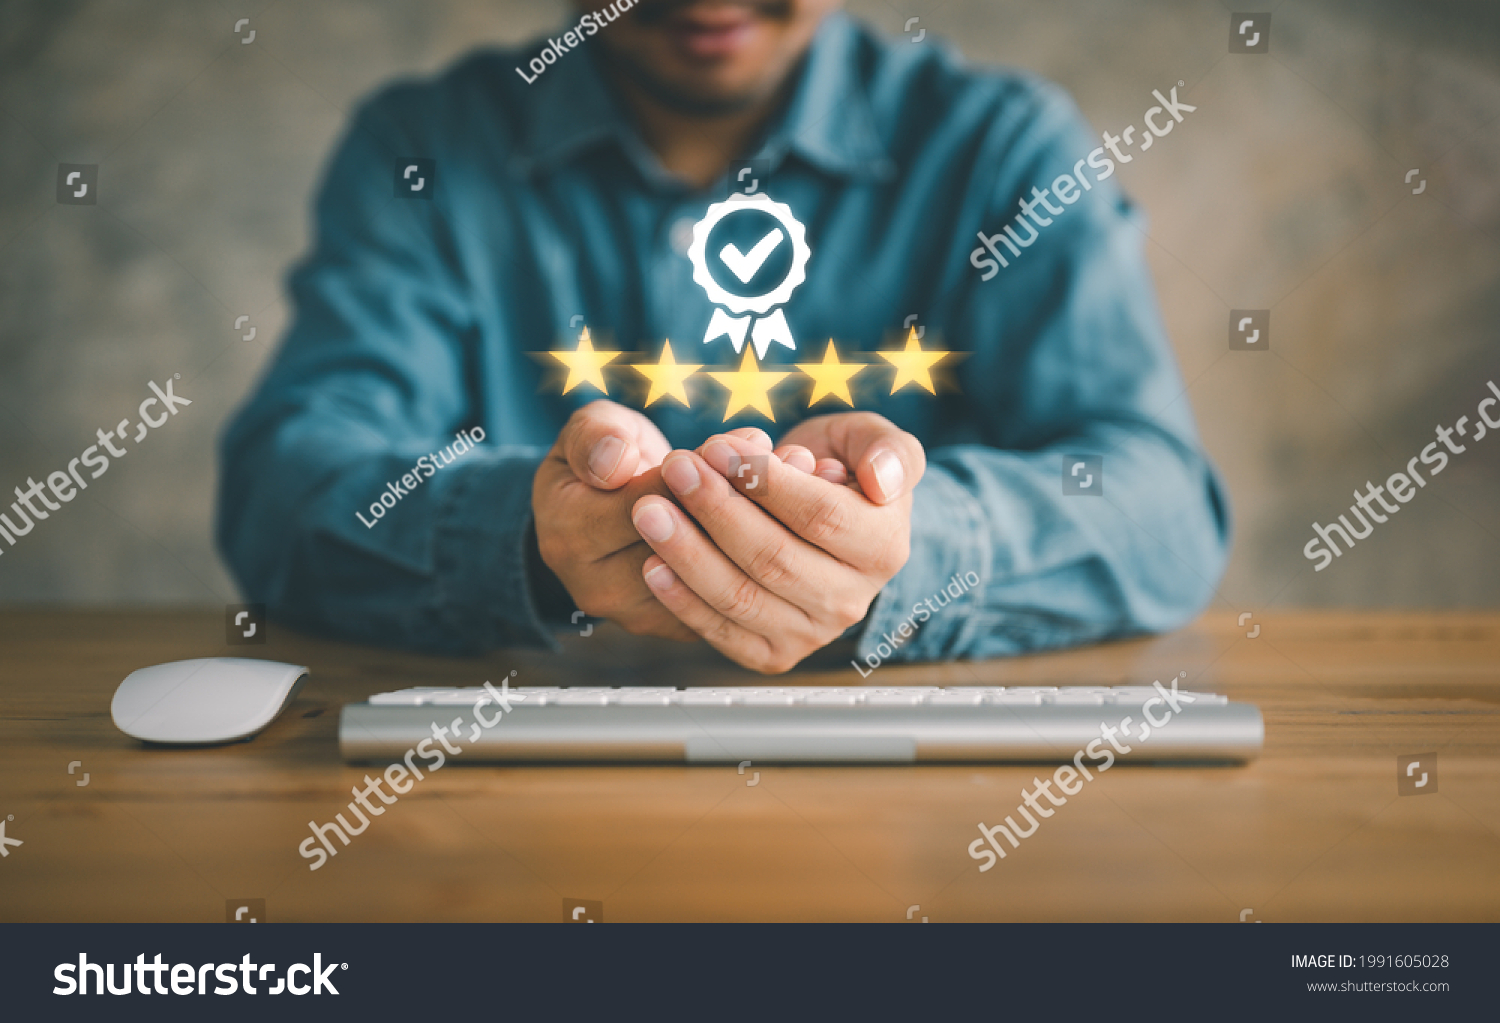 Hand shows the sign of the top service Quality assurance 5 star, Guarantee, Standards, ISO certification and standardization concept. #1991605028